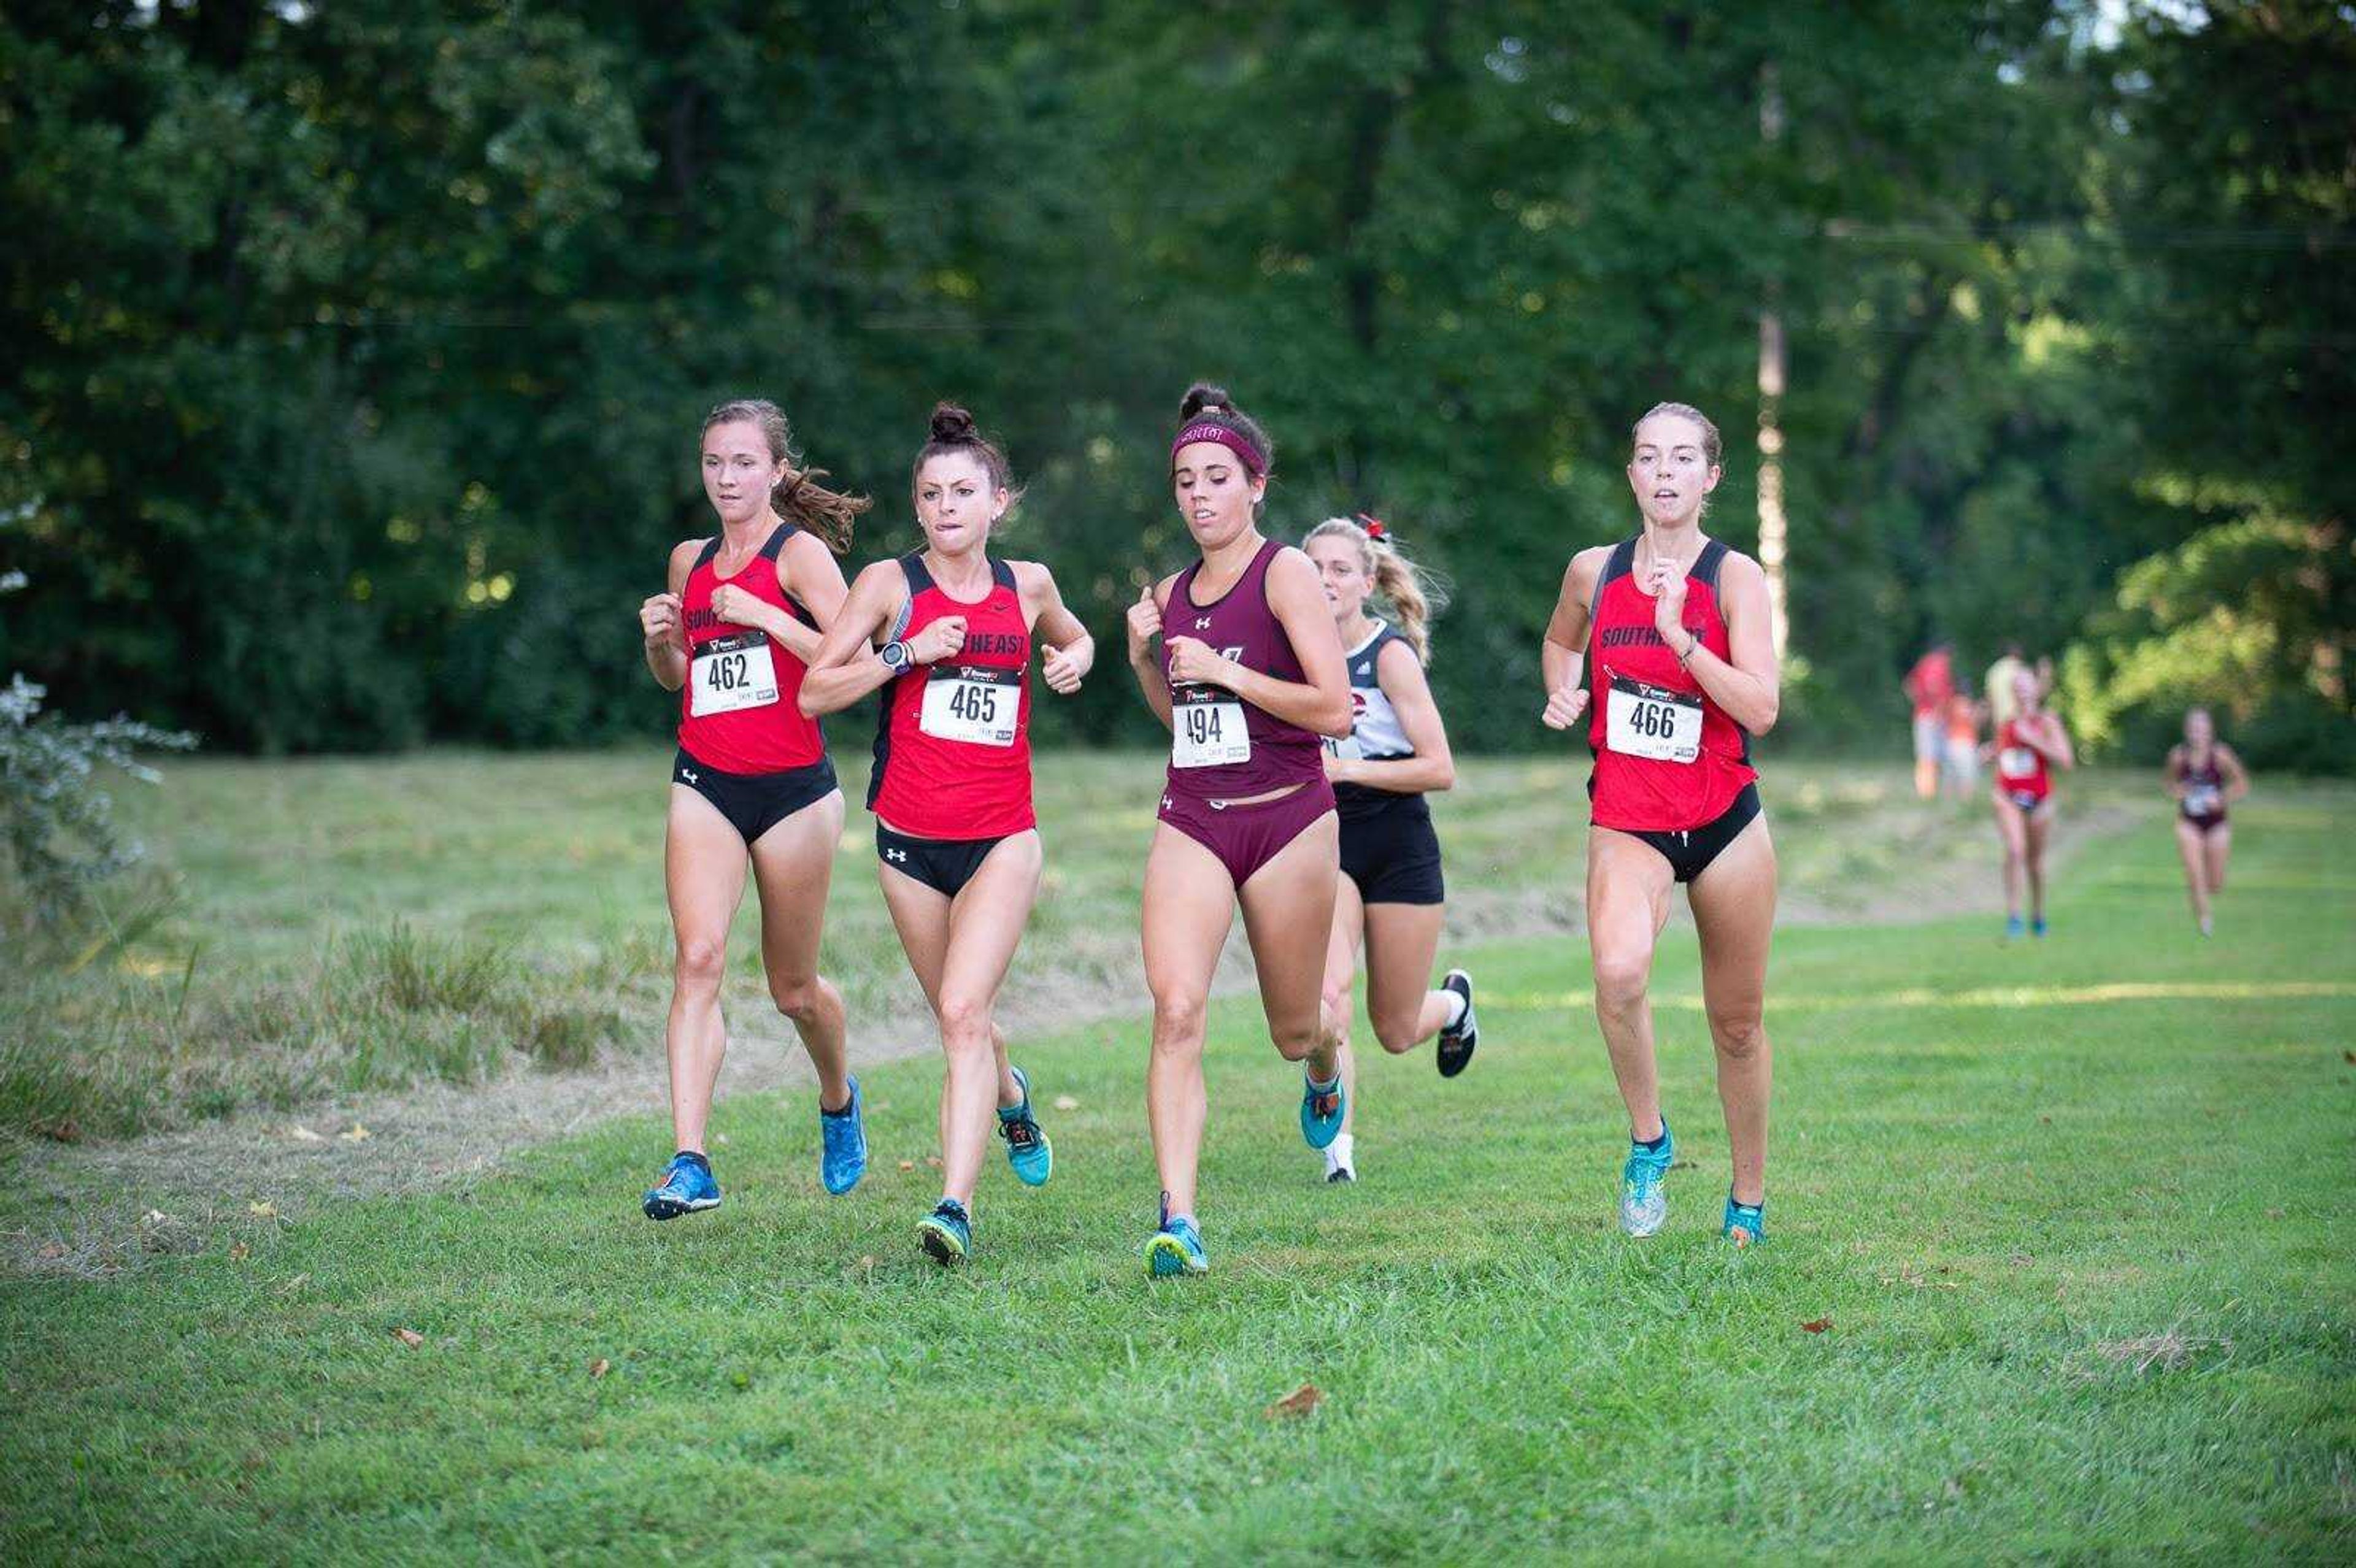 Kaitlyn Shea (#466), Carli Knott (#462) and Sydney O'Brien (#465) leading the pack during the Saluki Invite on Aug. 31.